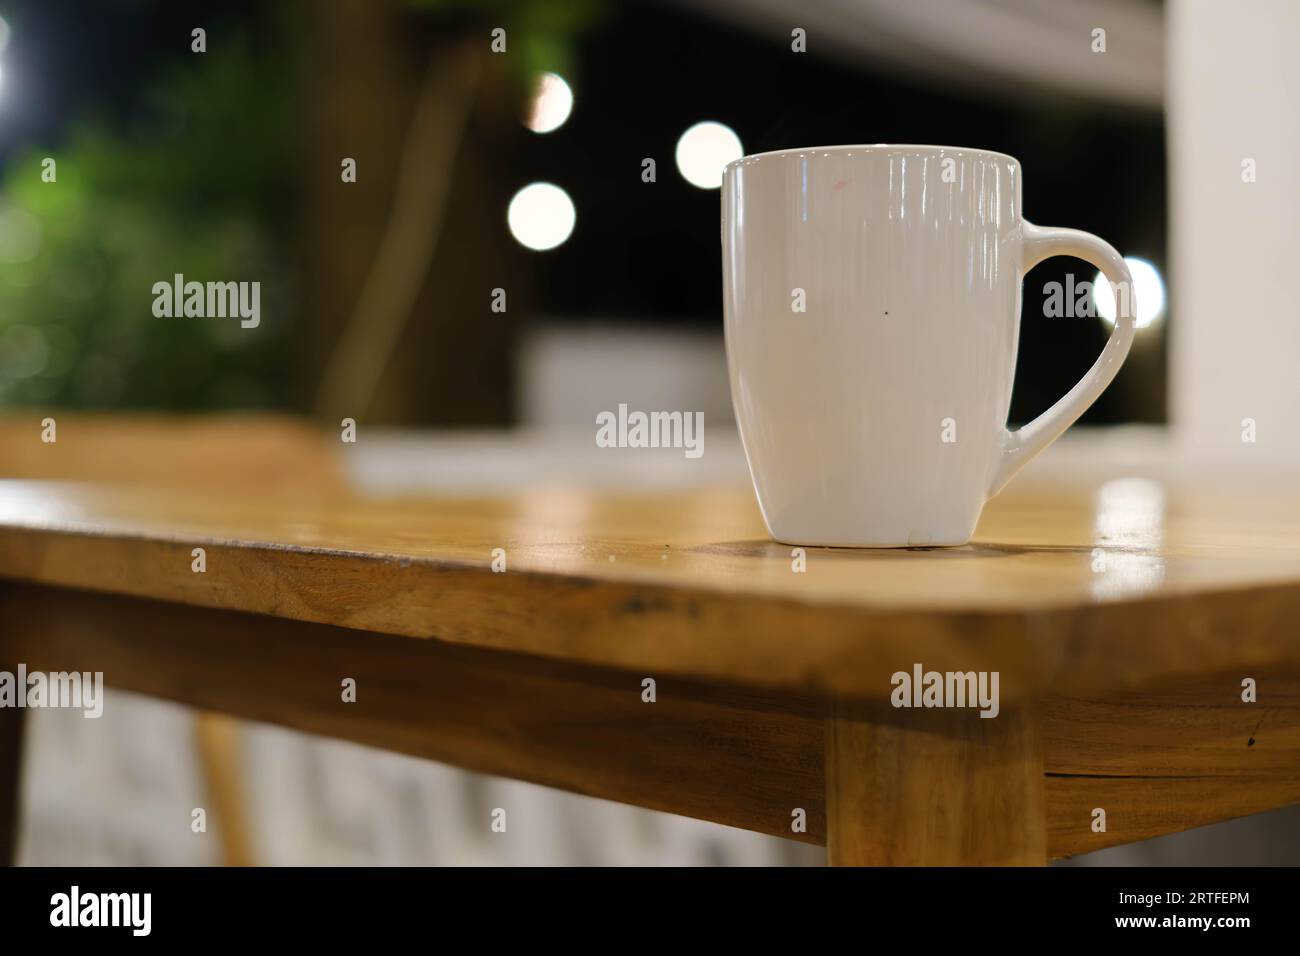 Selective shot of a white mug on a wooden table with bokeh or blurred background Stock Photo